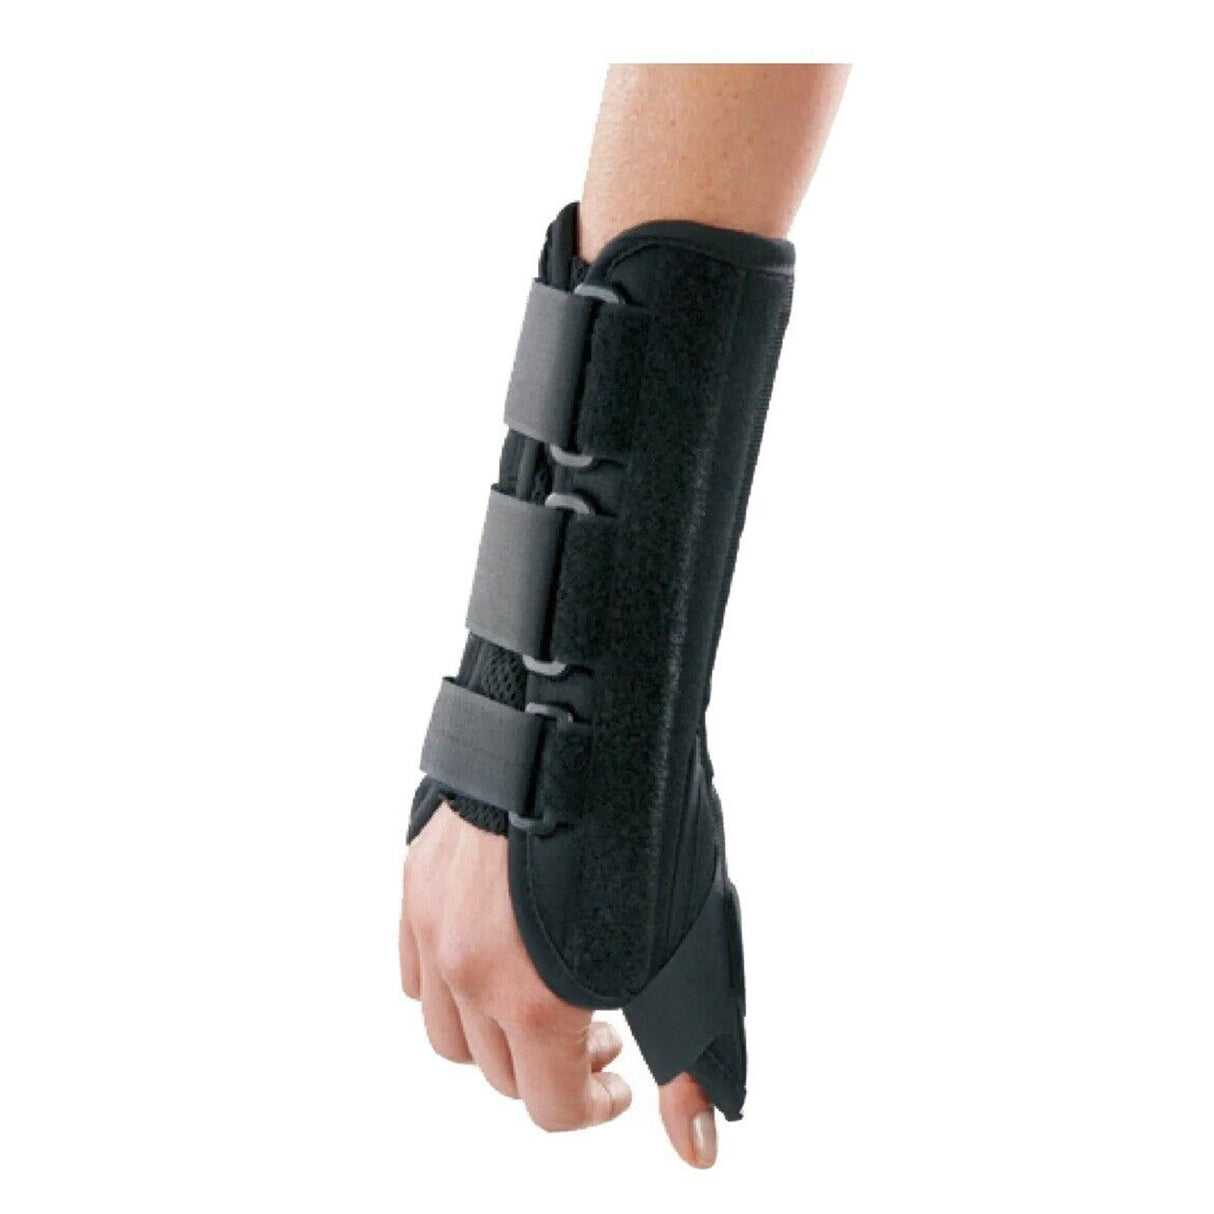 Apollo Universal Wrist Brace with Thumb Spica, 11 Inch Length, for Right Wrist